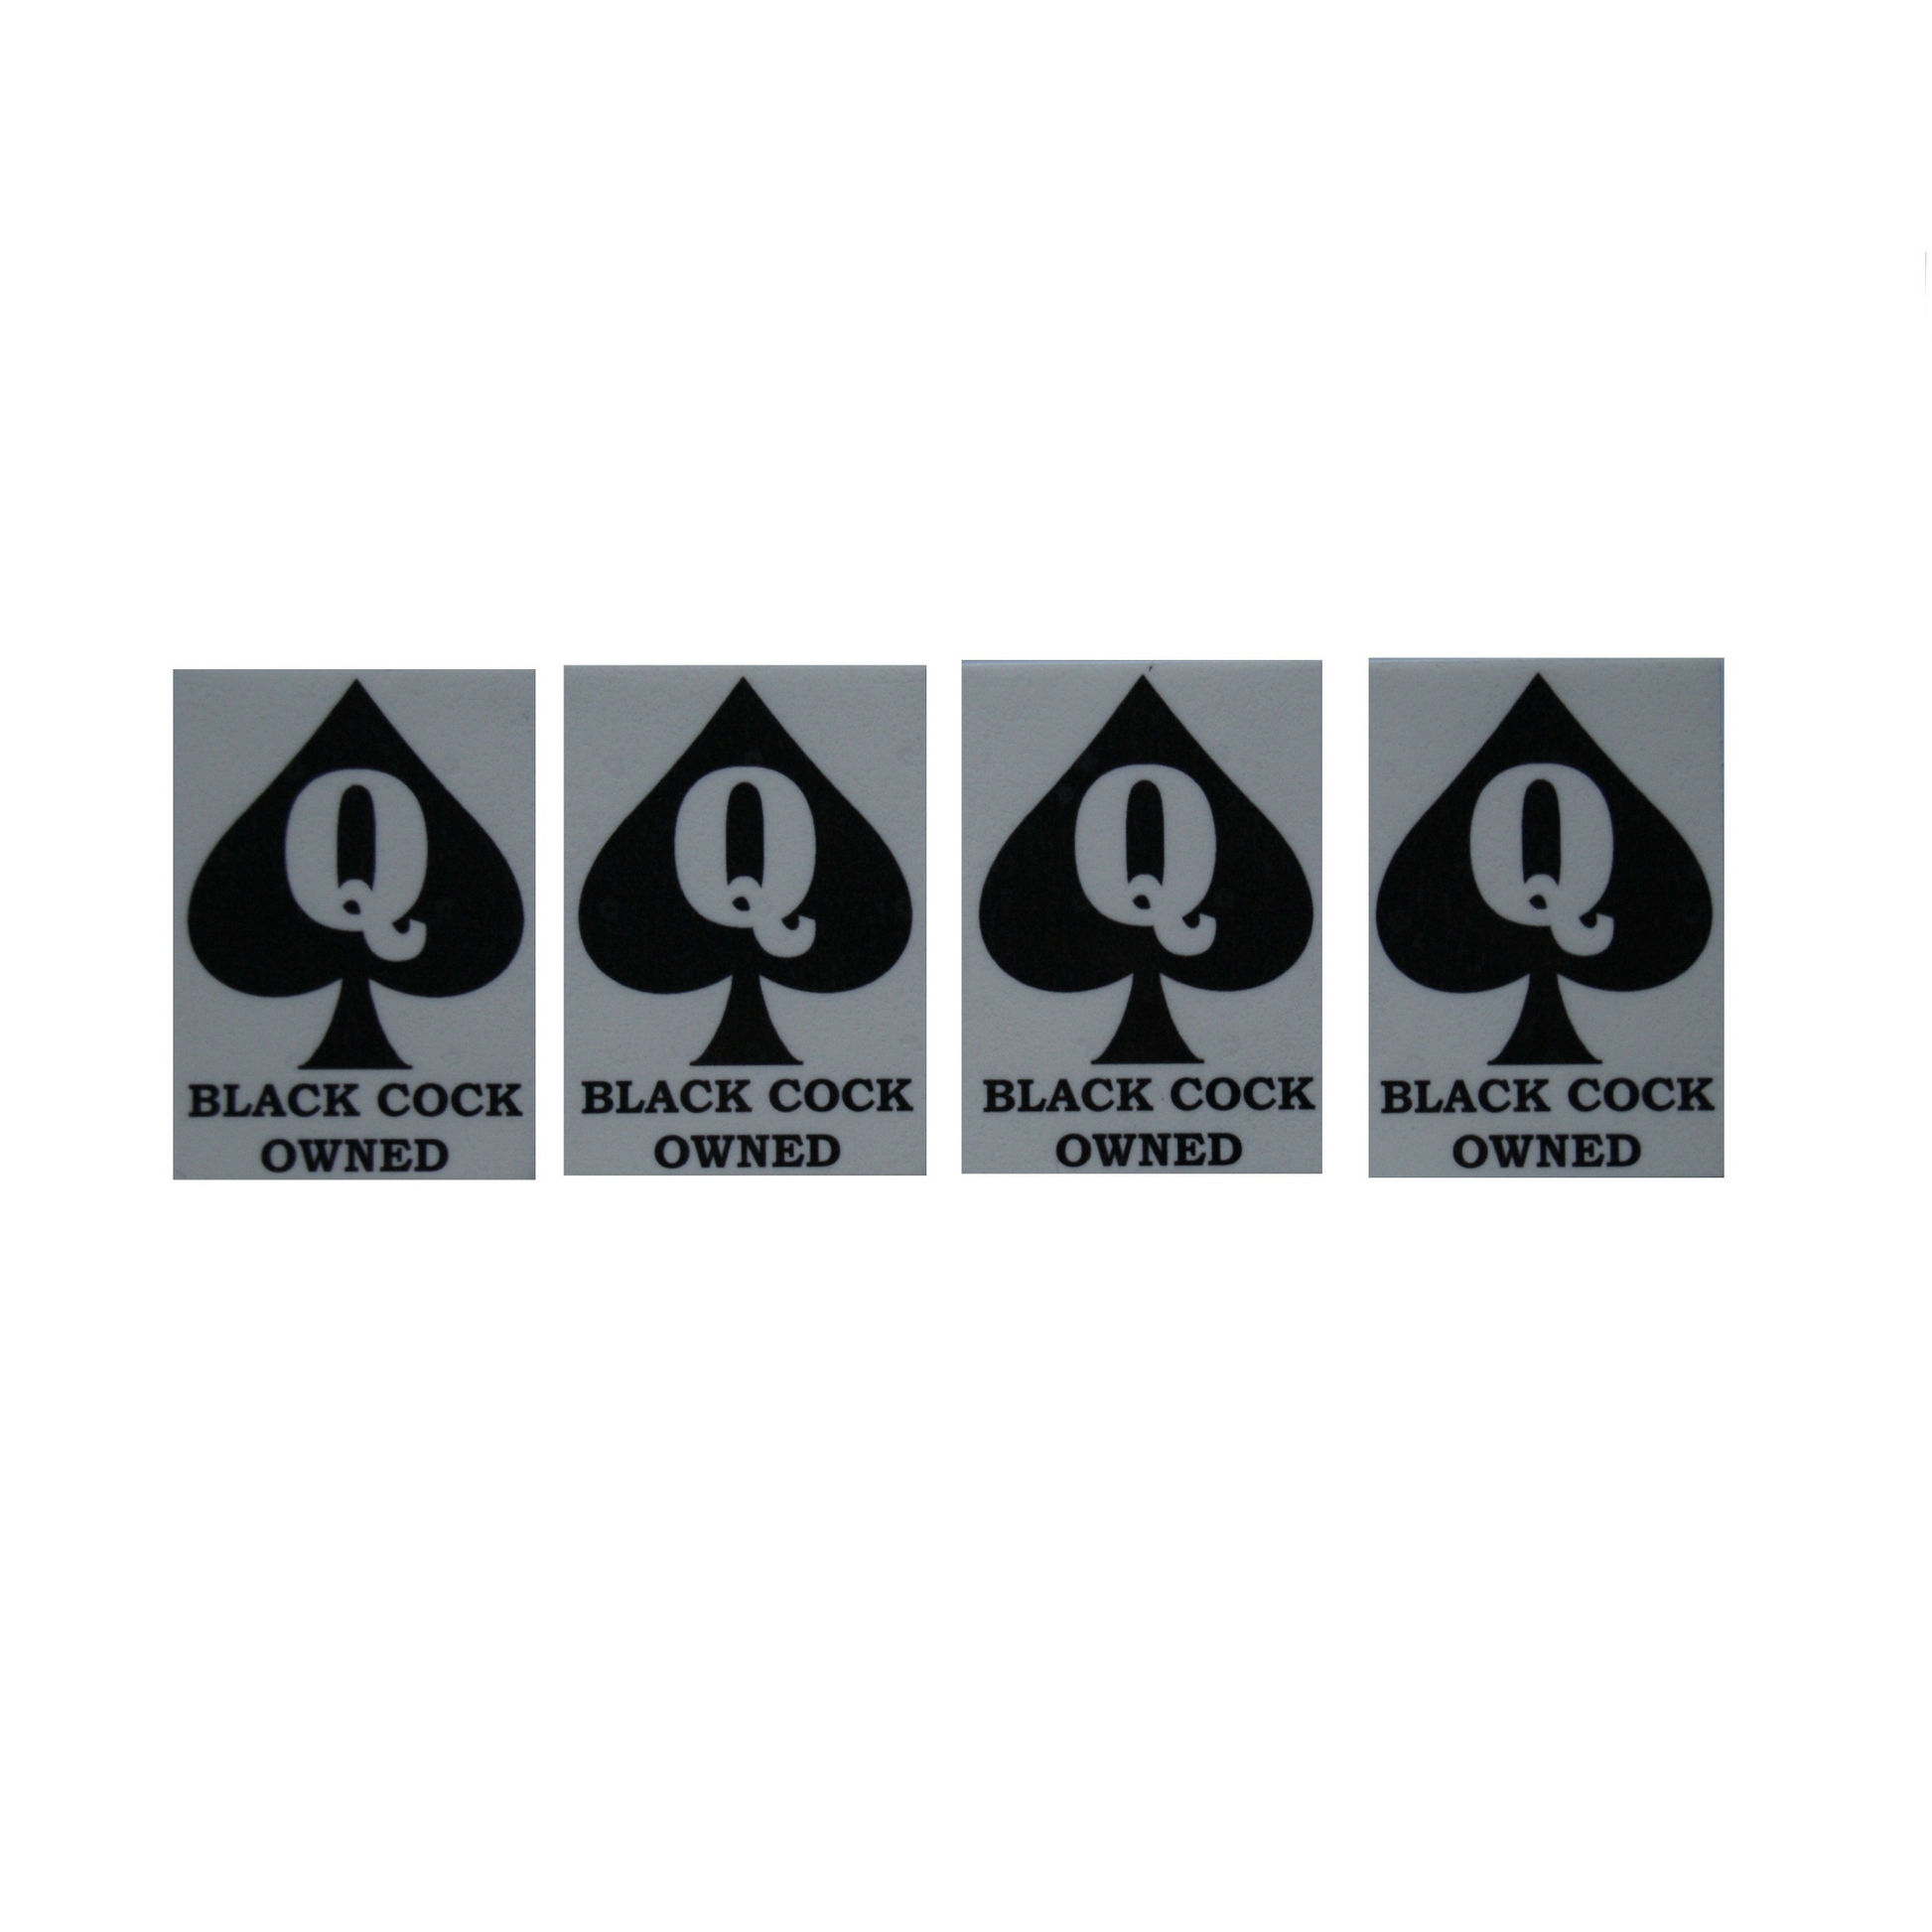 Pack of 4 - Hotwife Temporary Tattoo - Queen Of Spades (Cuckold) Black Cock Owned